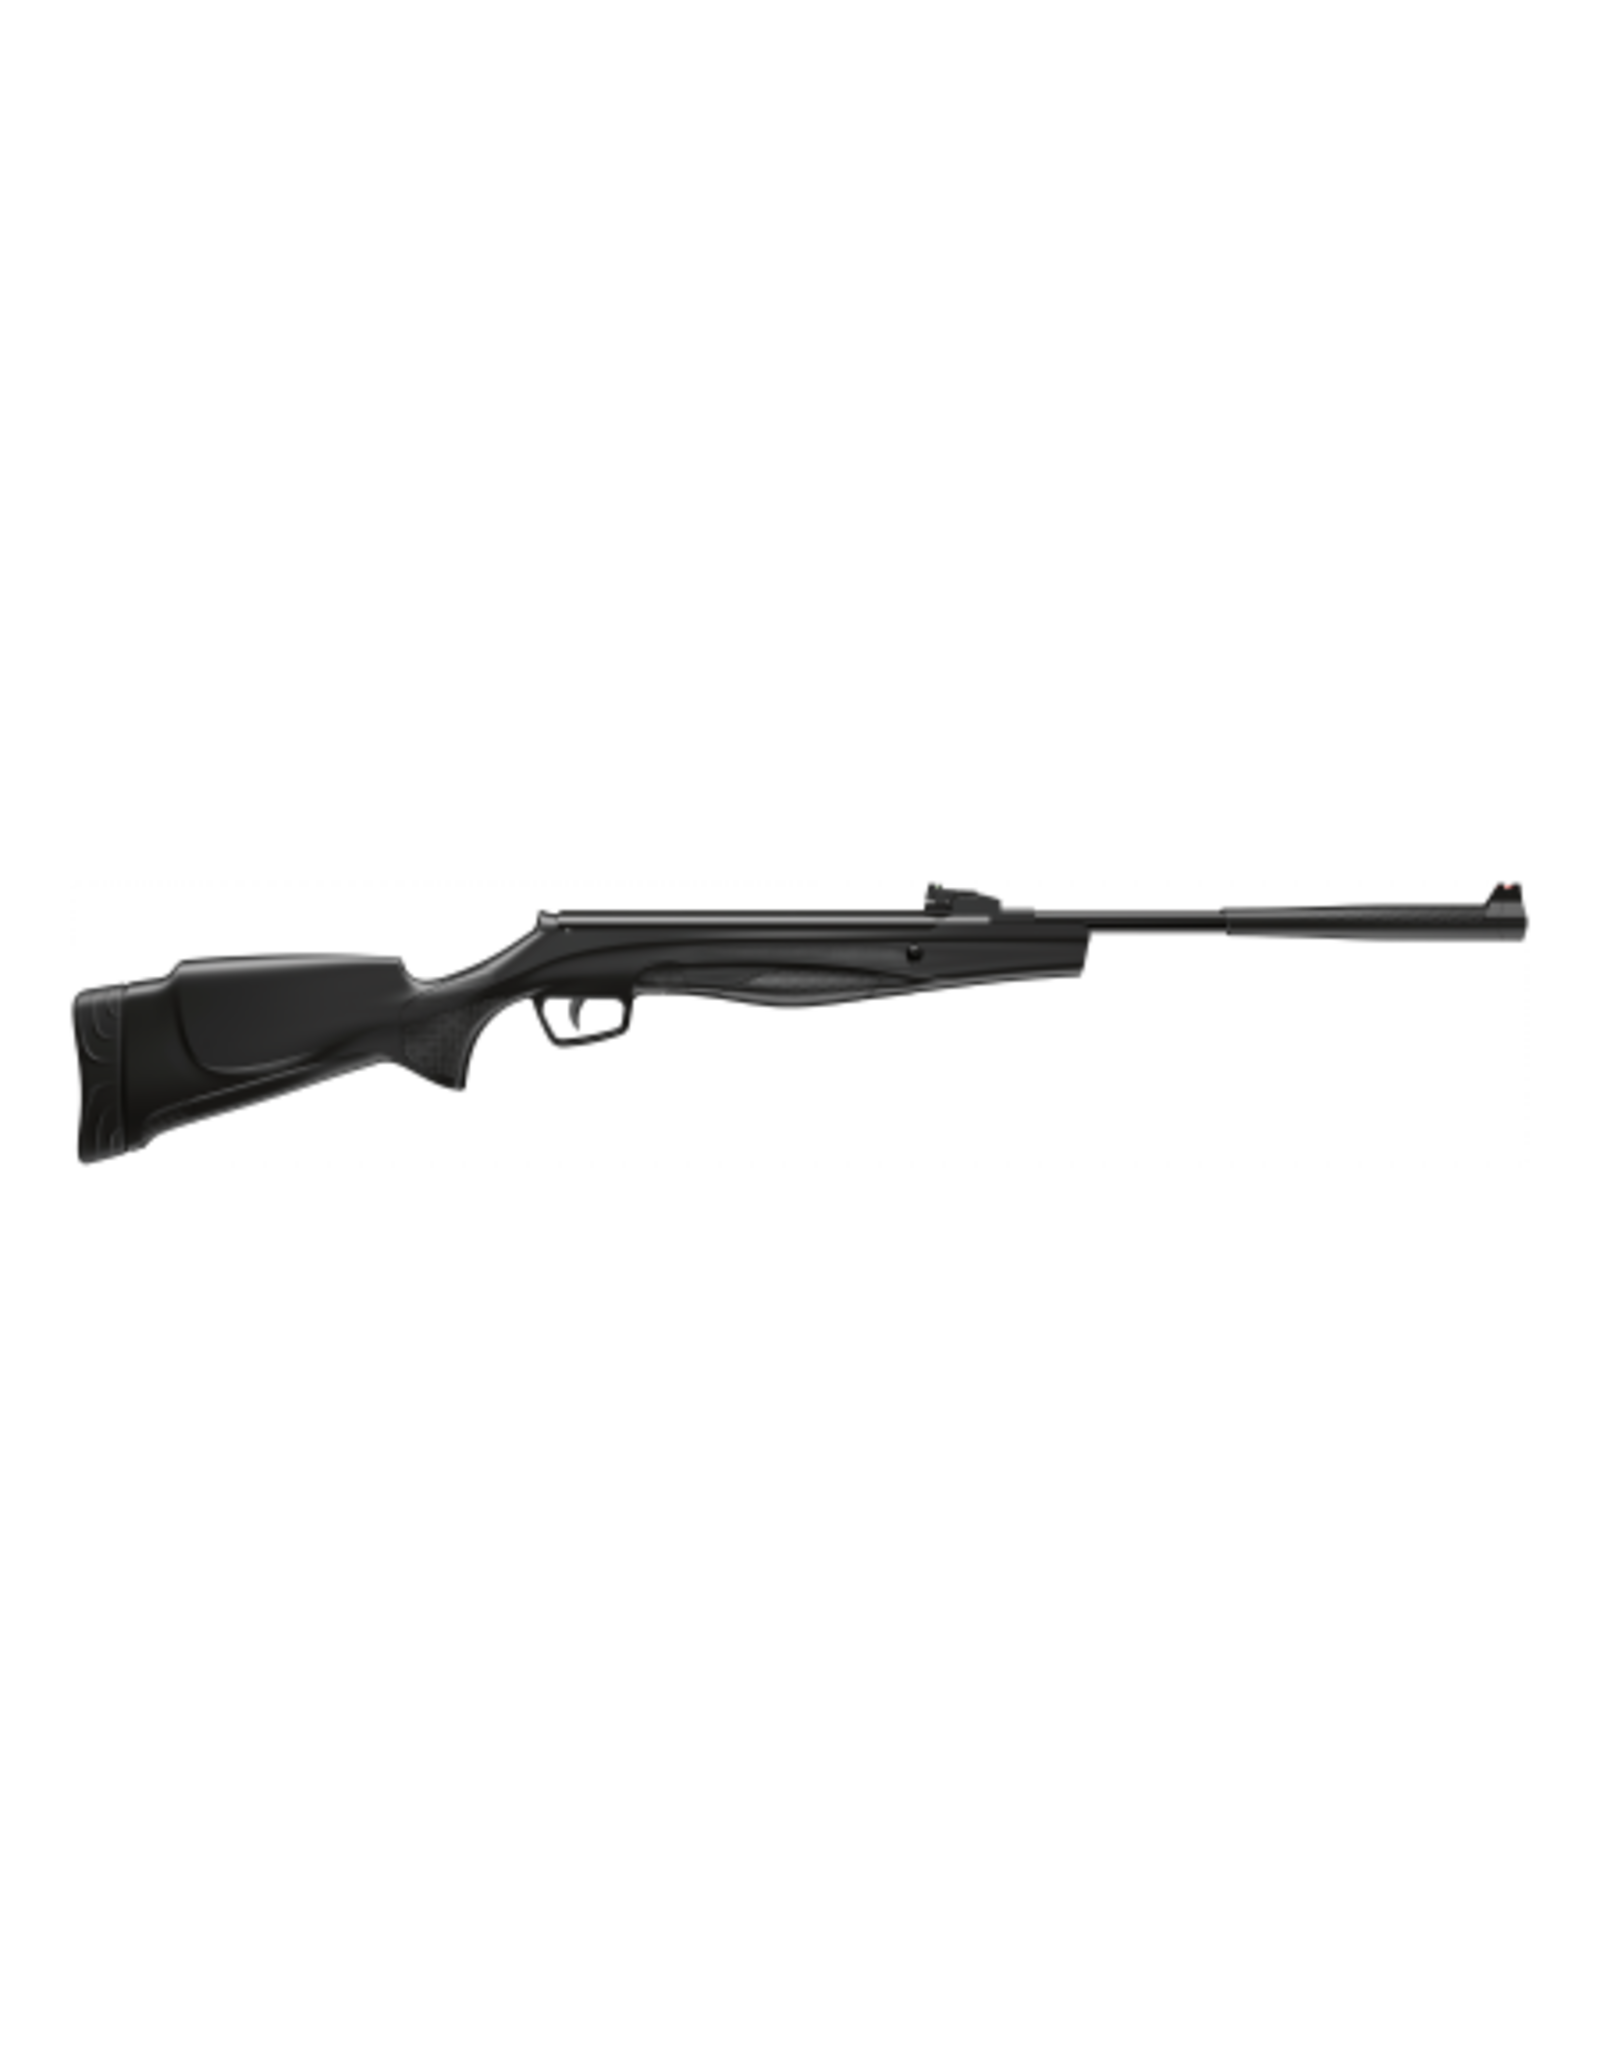 Stoeger Arms Stoeger S3000C SYNTHETIC .177 Pellet Rifle (495 fps)